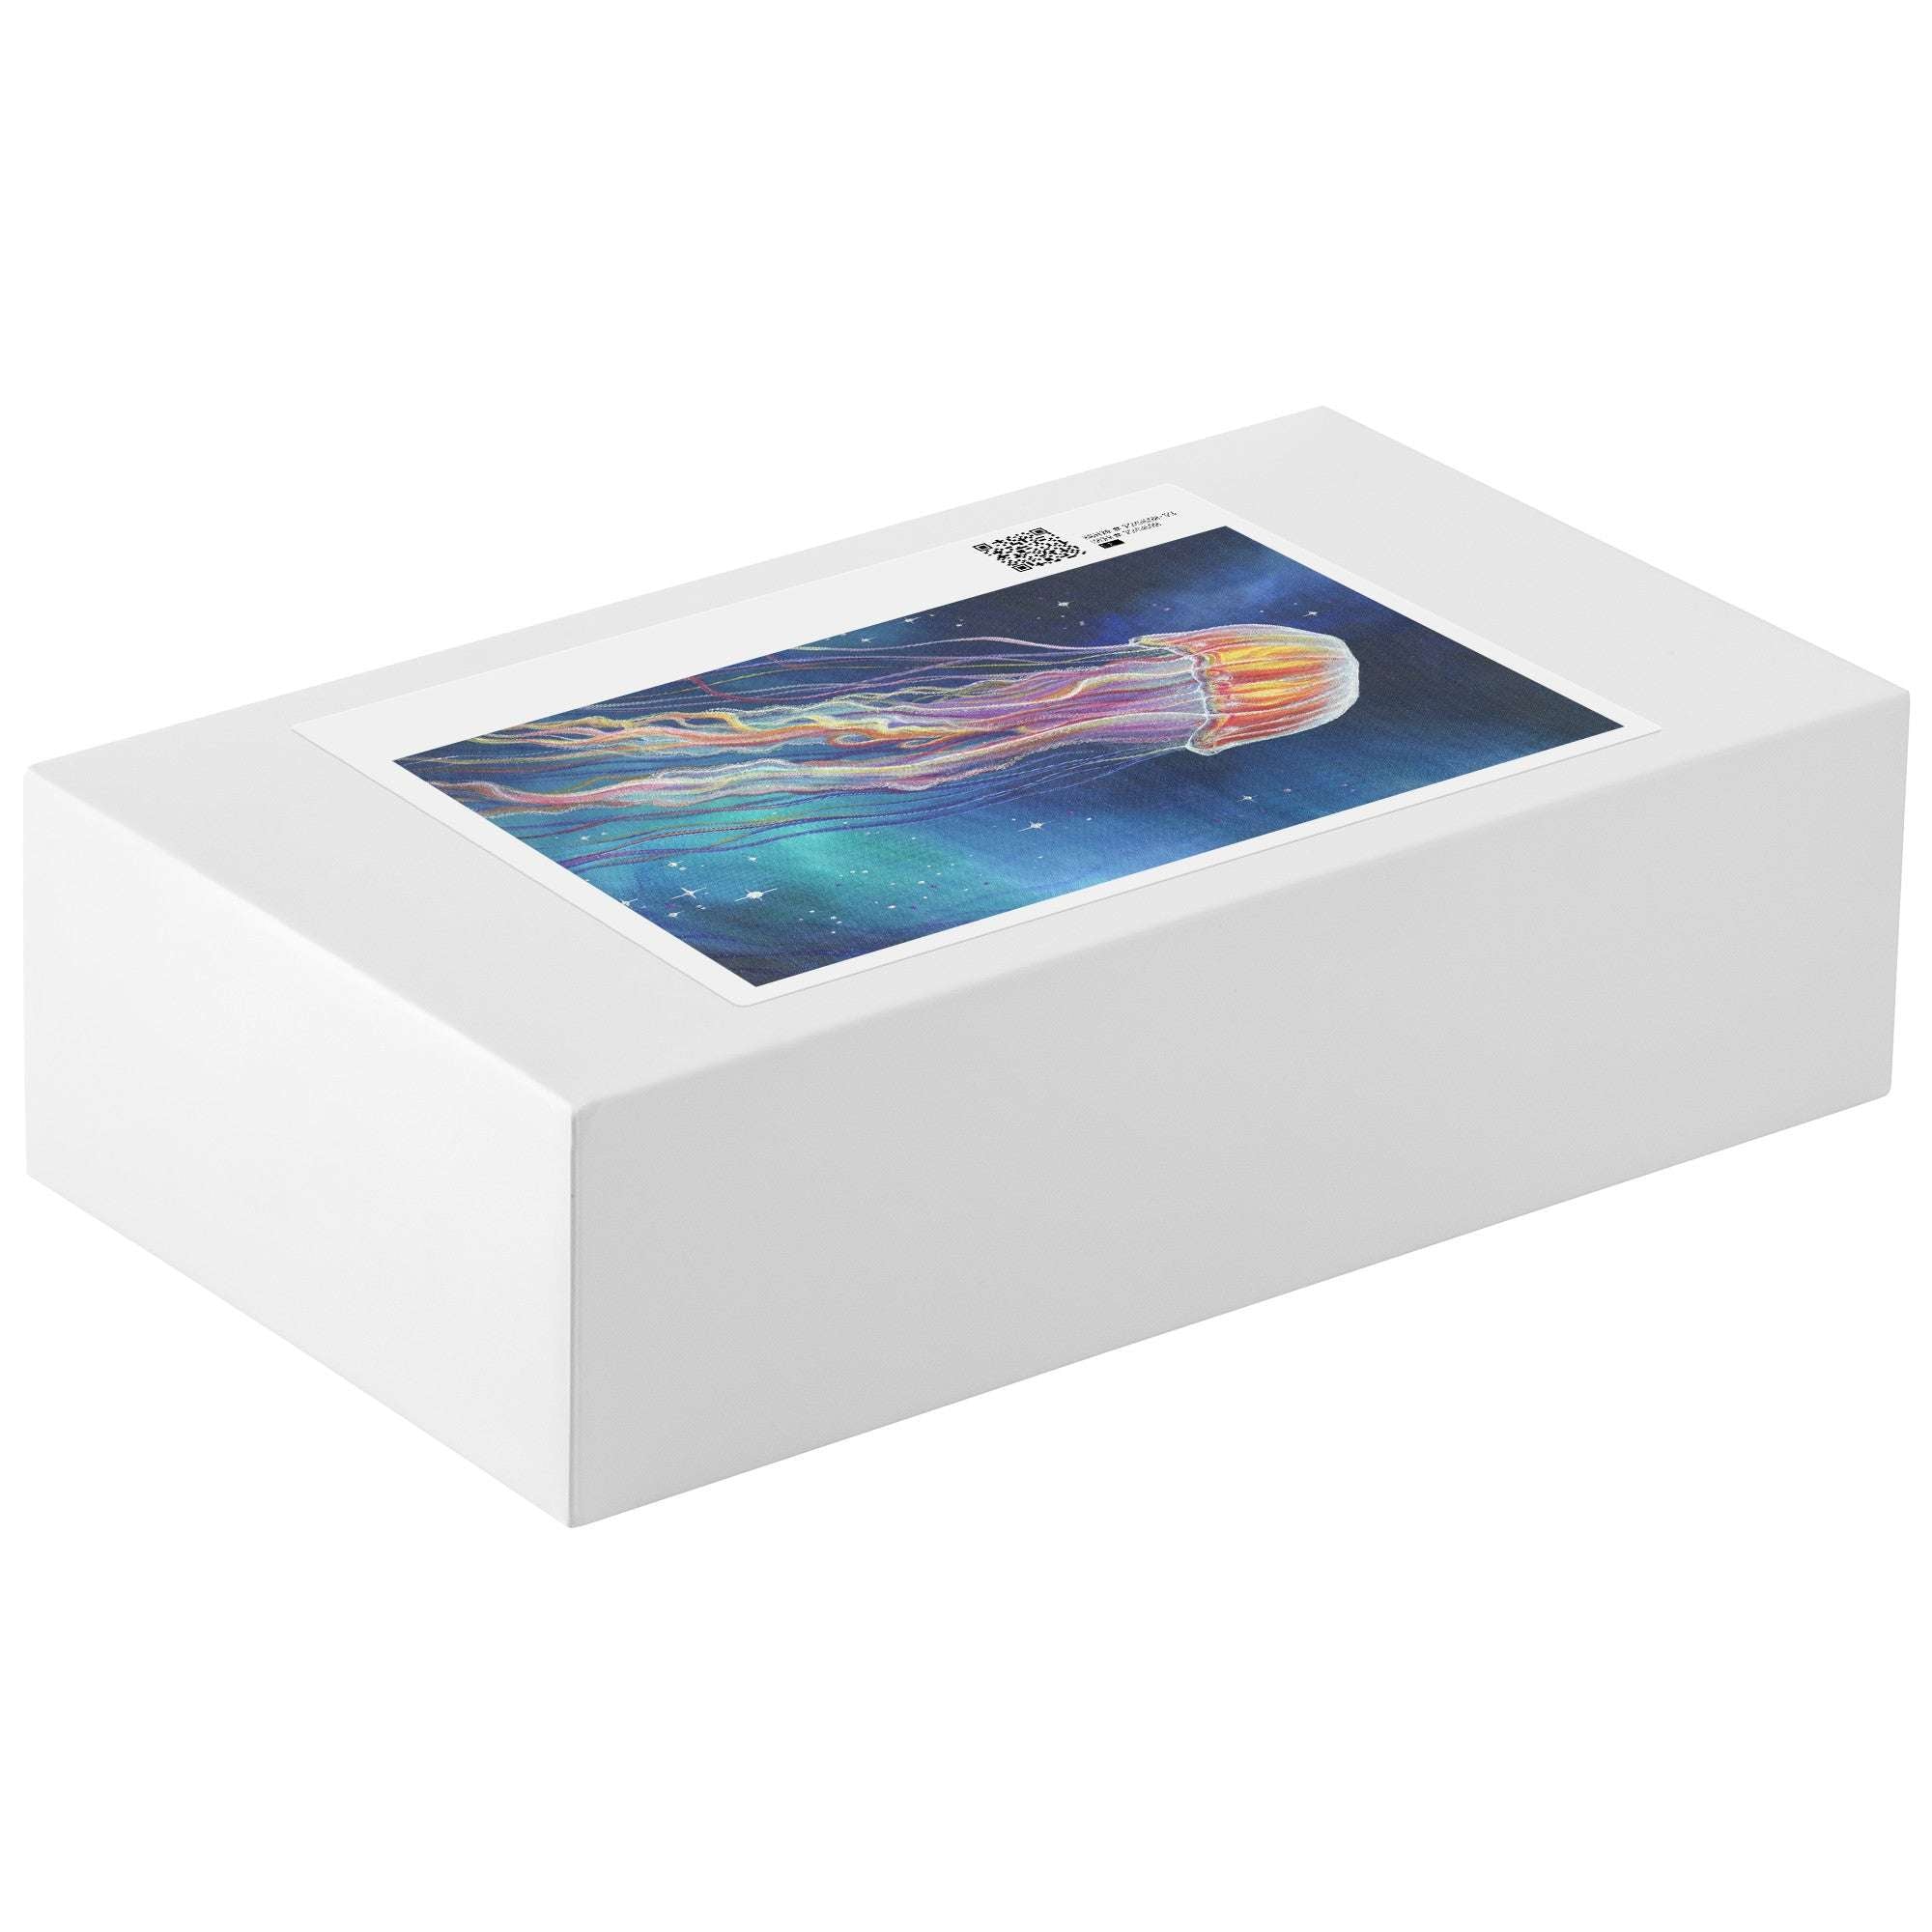 A white rectangular puzzle box displaying a colorful image of a Jellyfish Puzzle under the sea on the lid